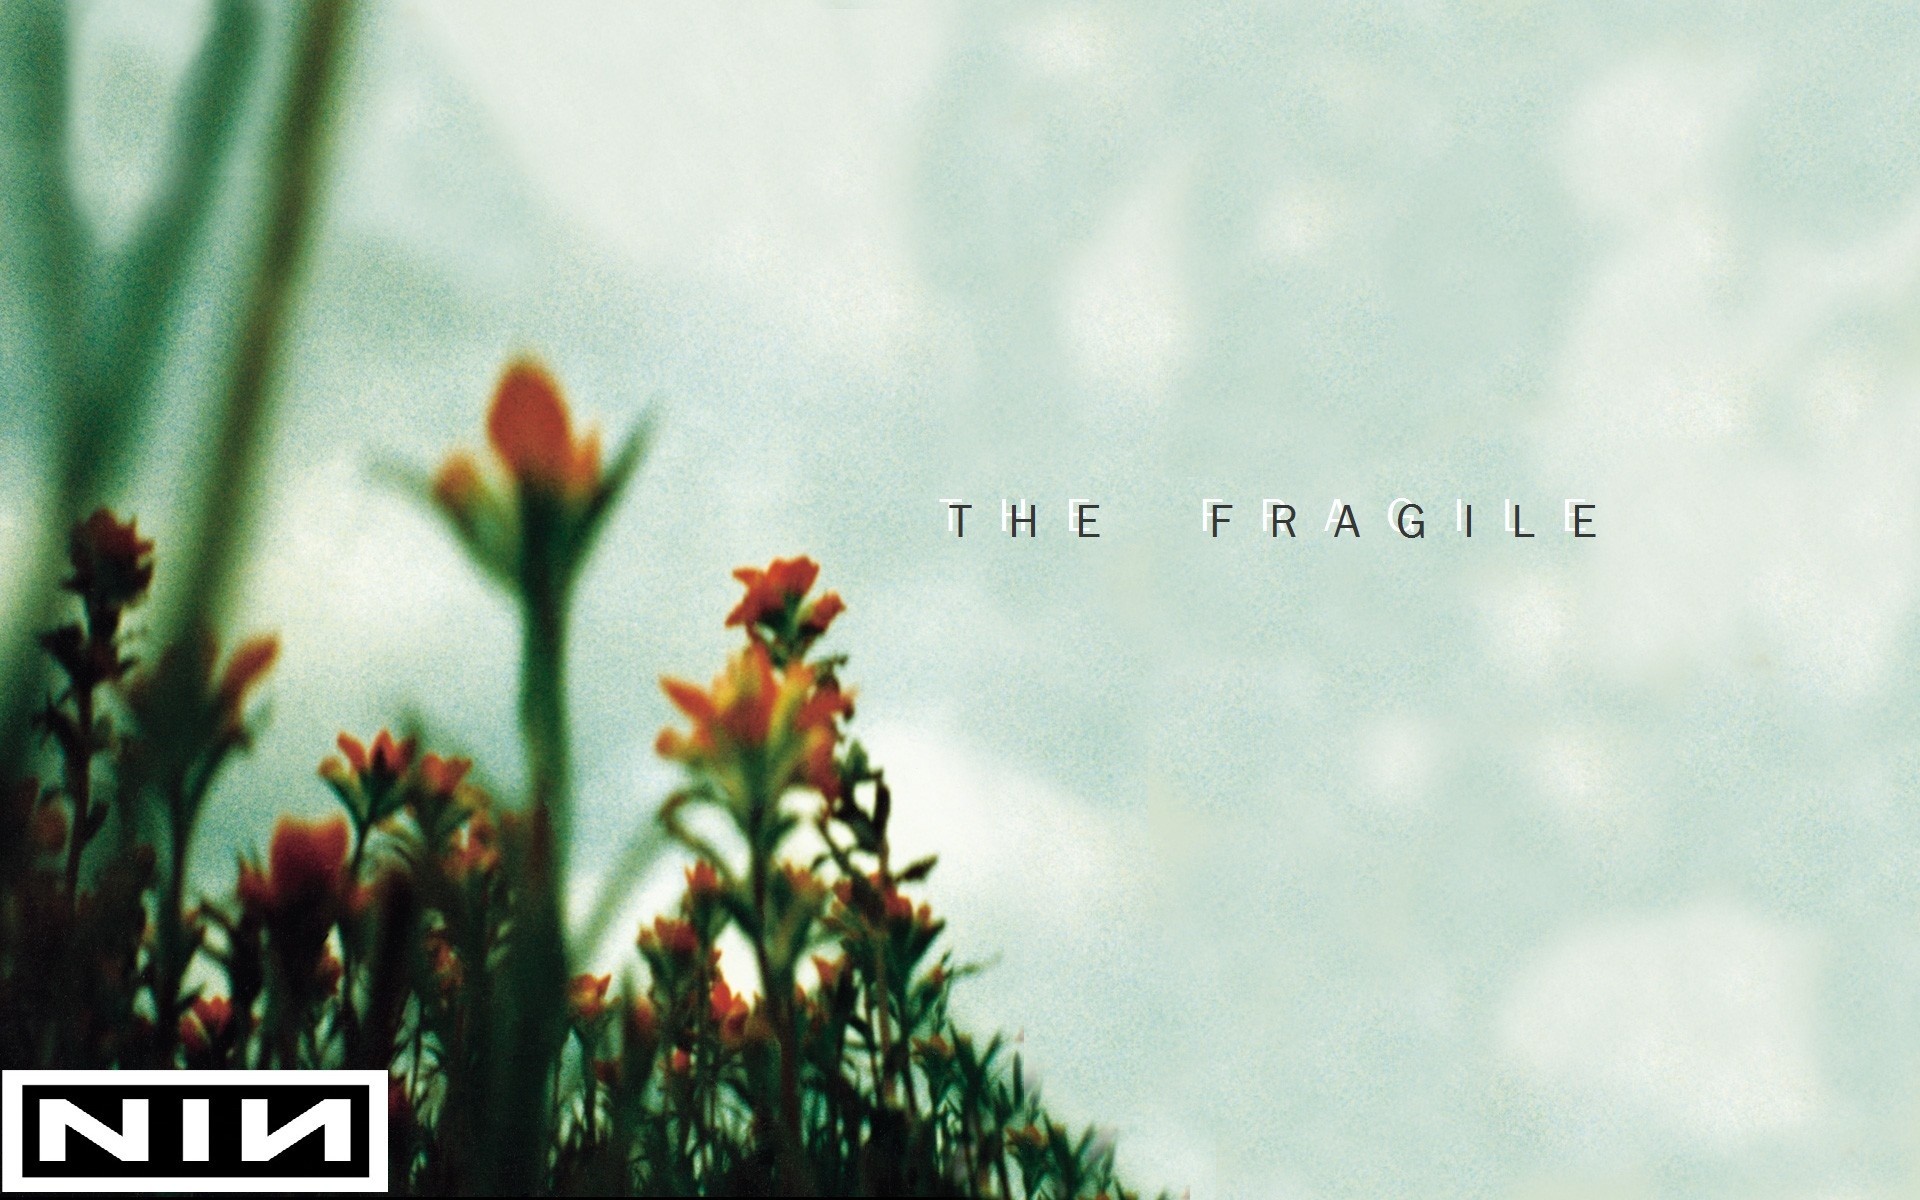 1920x1200 ... CaptainSelection Nine Inch Nails - The Fragile Wallpaper by  CaptainSelection